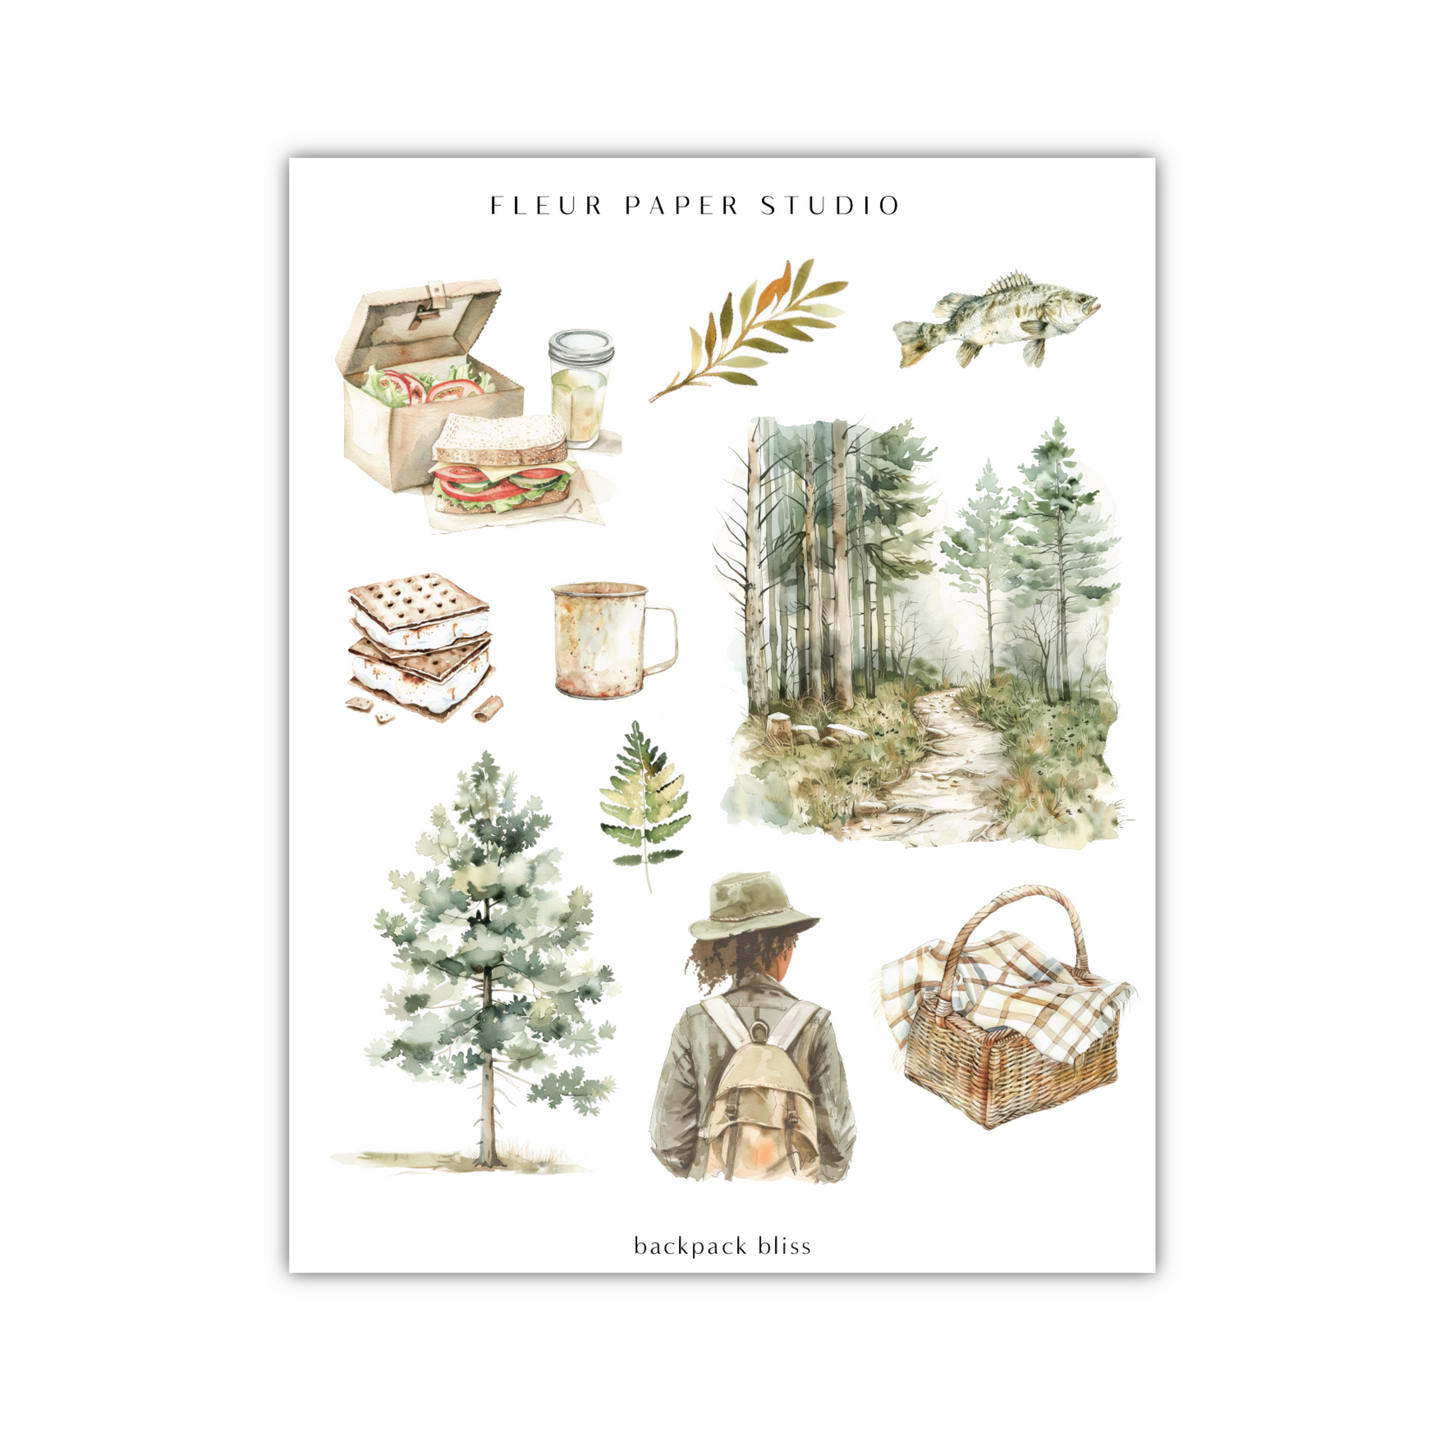 a book with illustrations of trees and other items